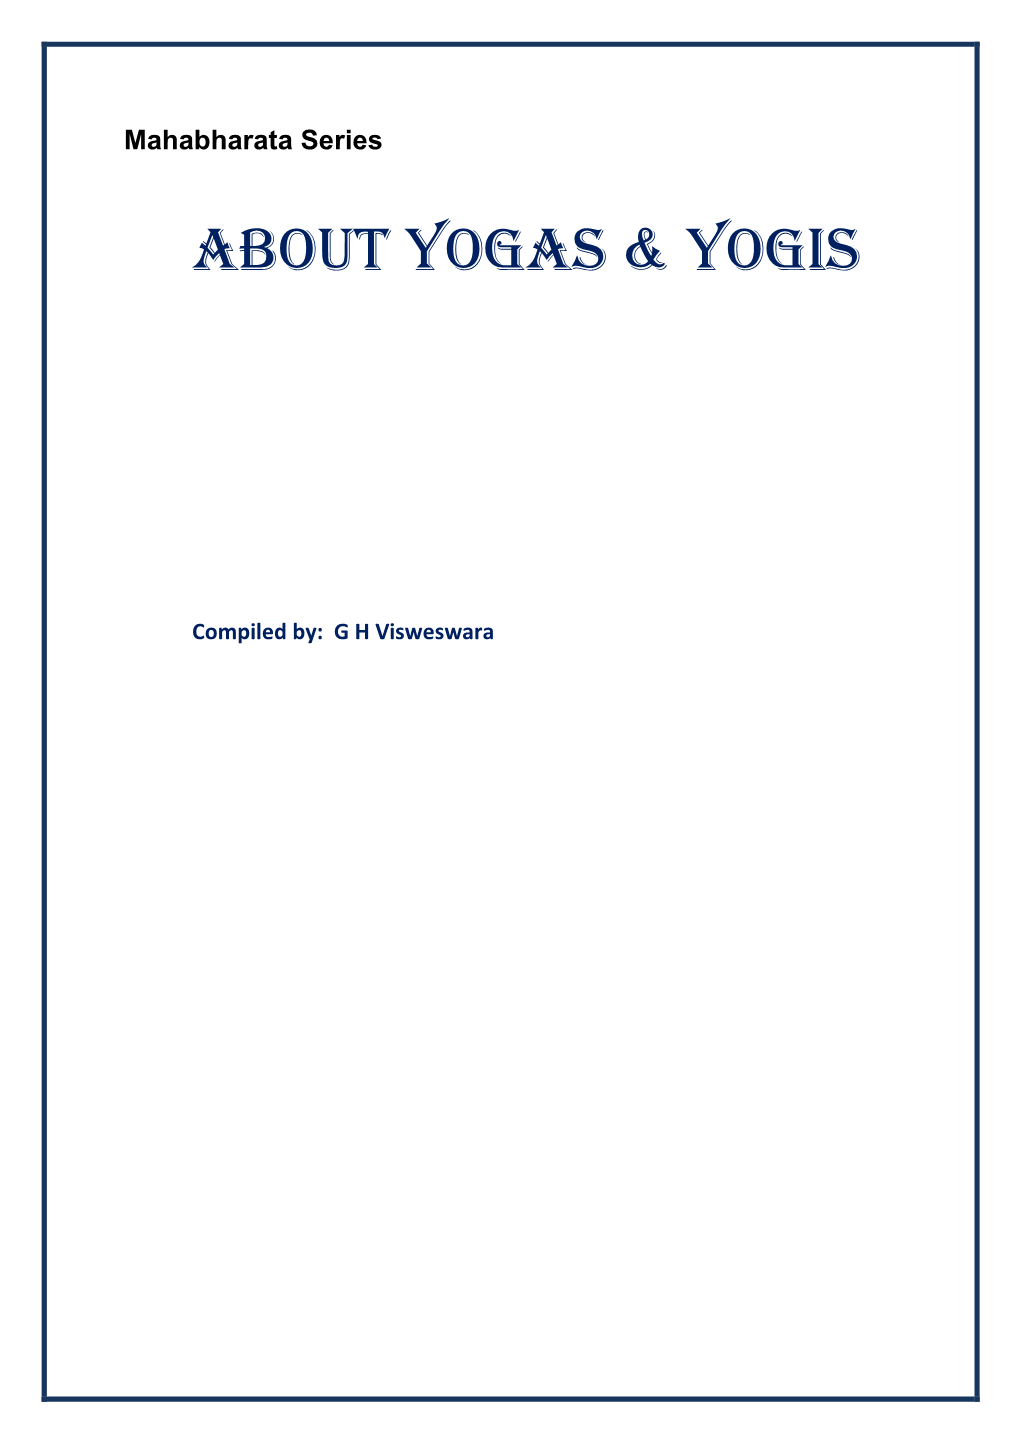 About Yogas & Yogis